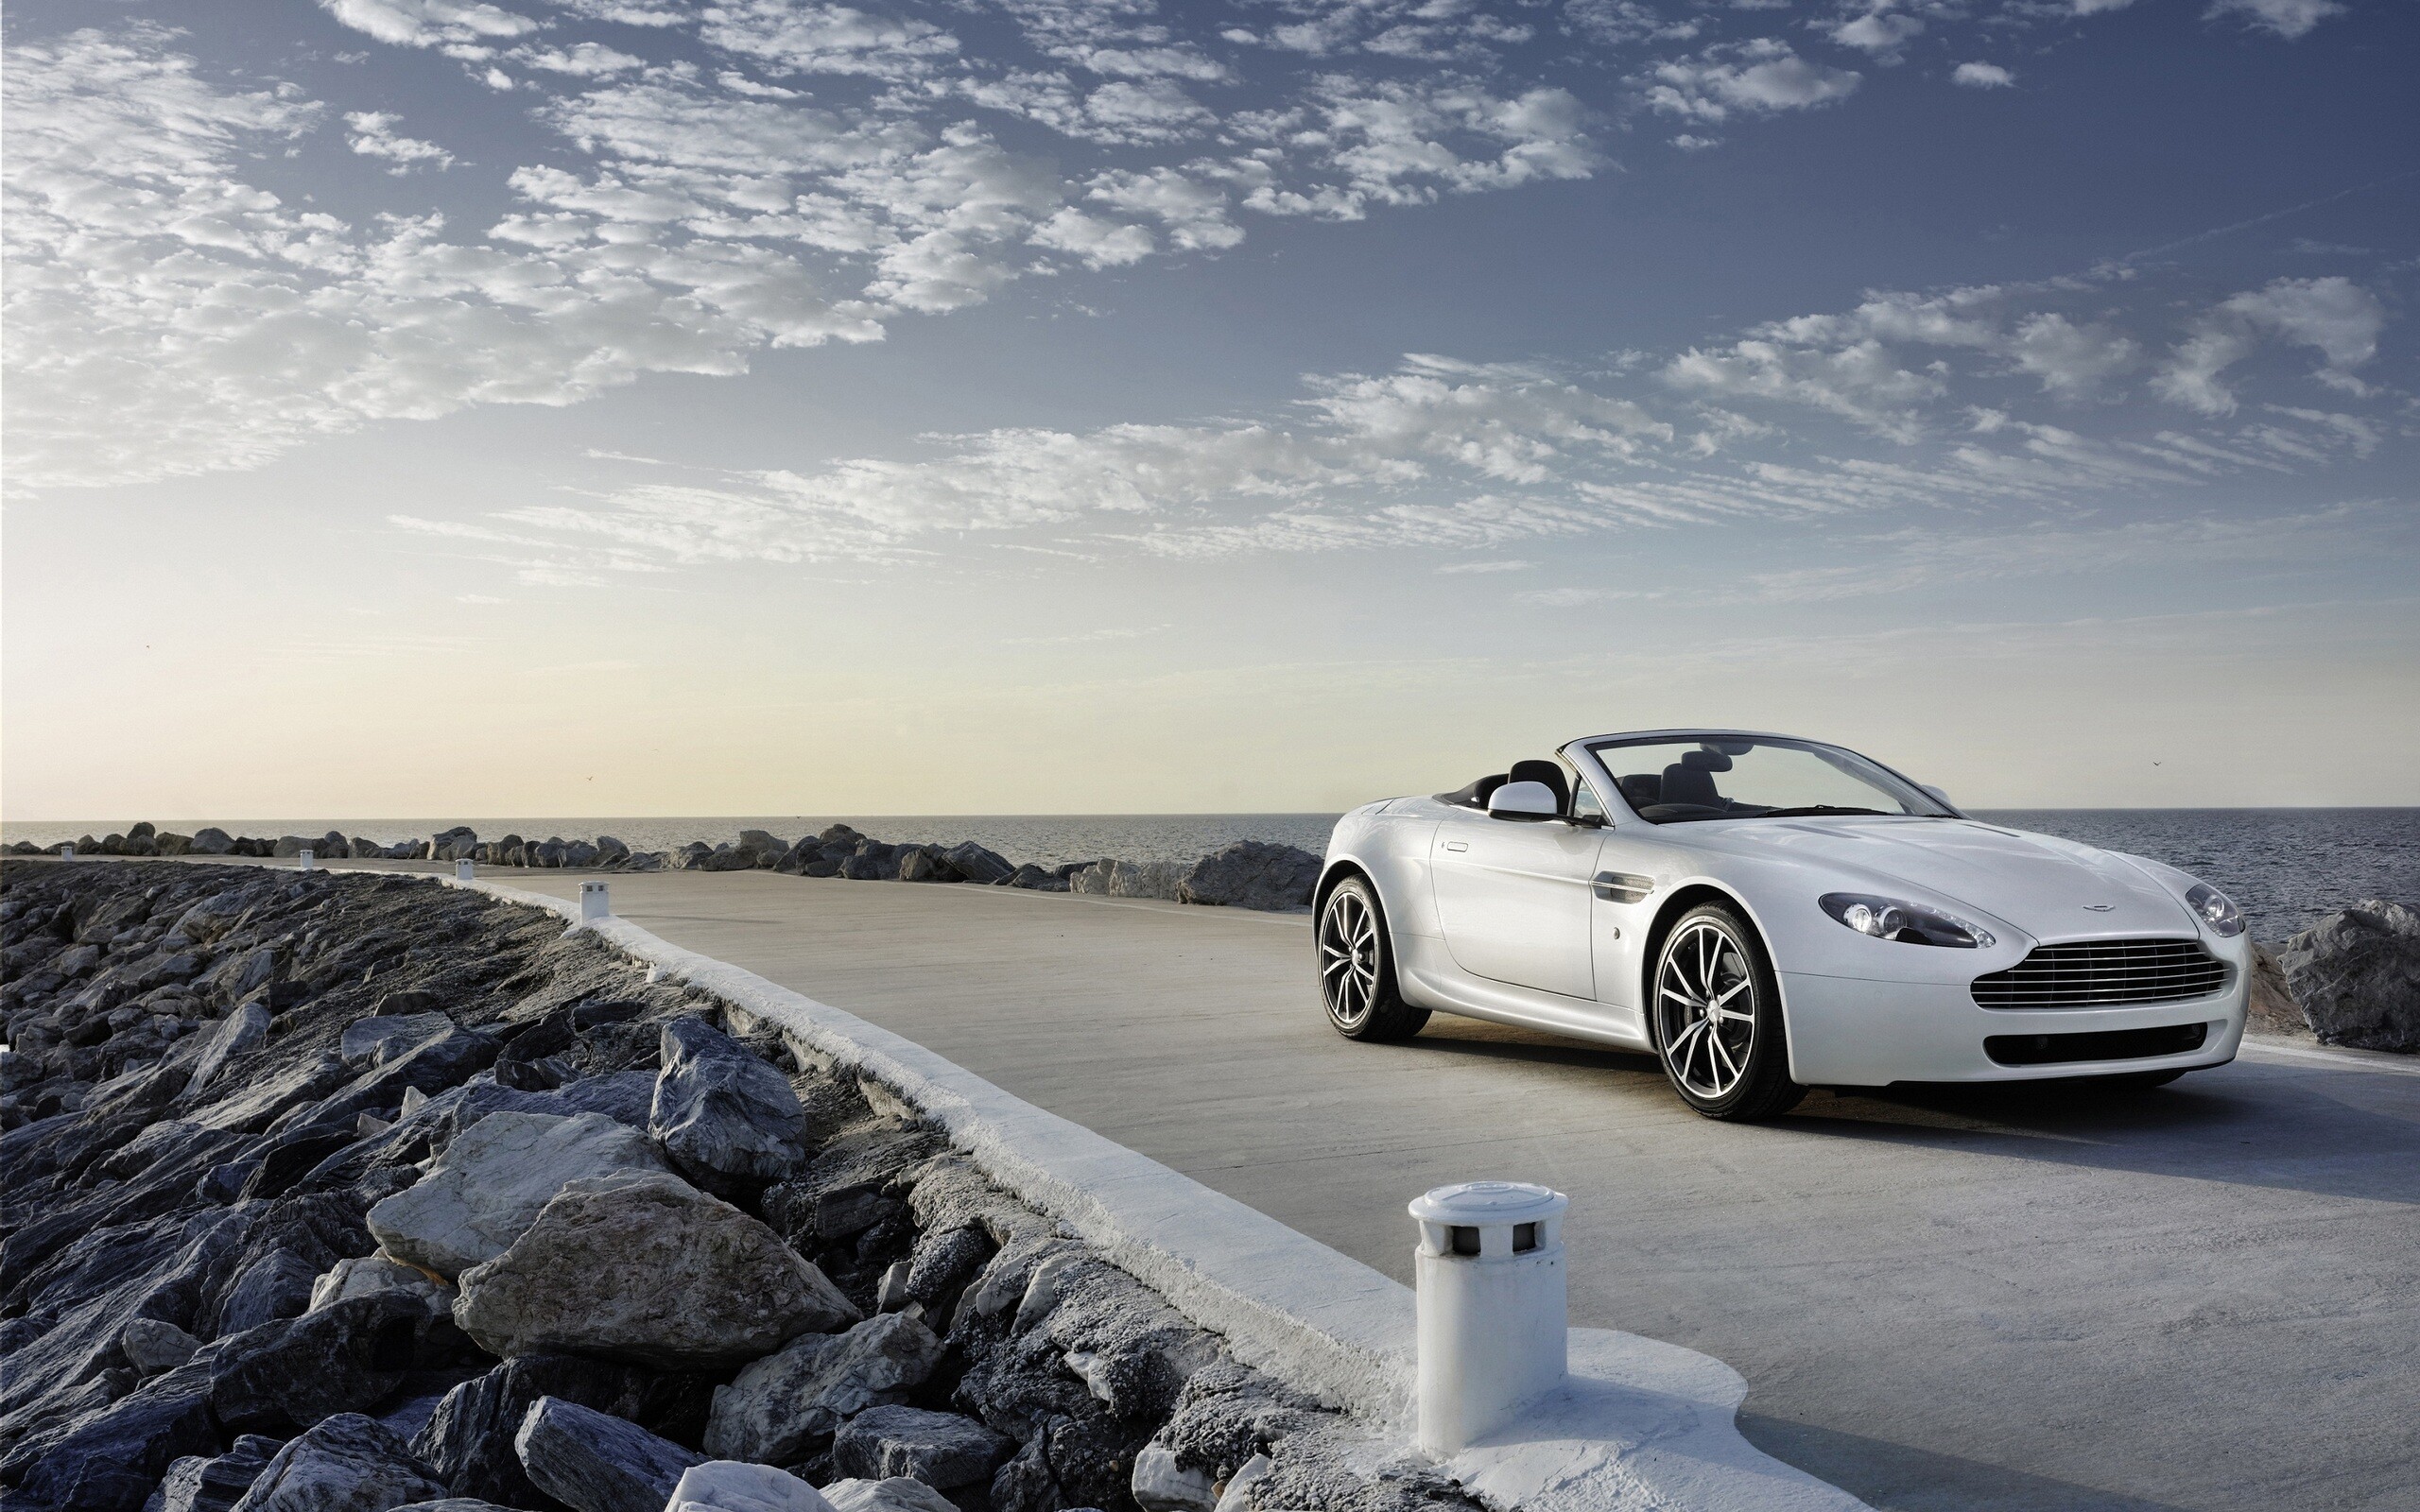 Aston Martin: An English manufacturer of luxury sports cars and grand tourers, Vantage. 2560x1600 HD Wallpaper.